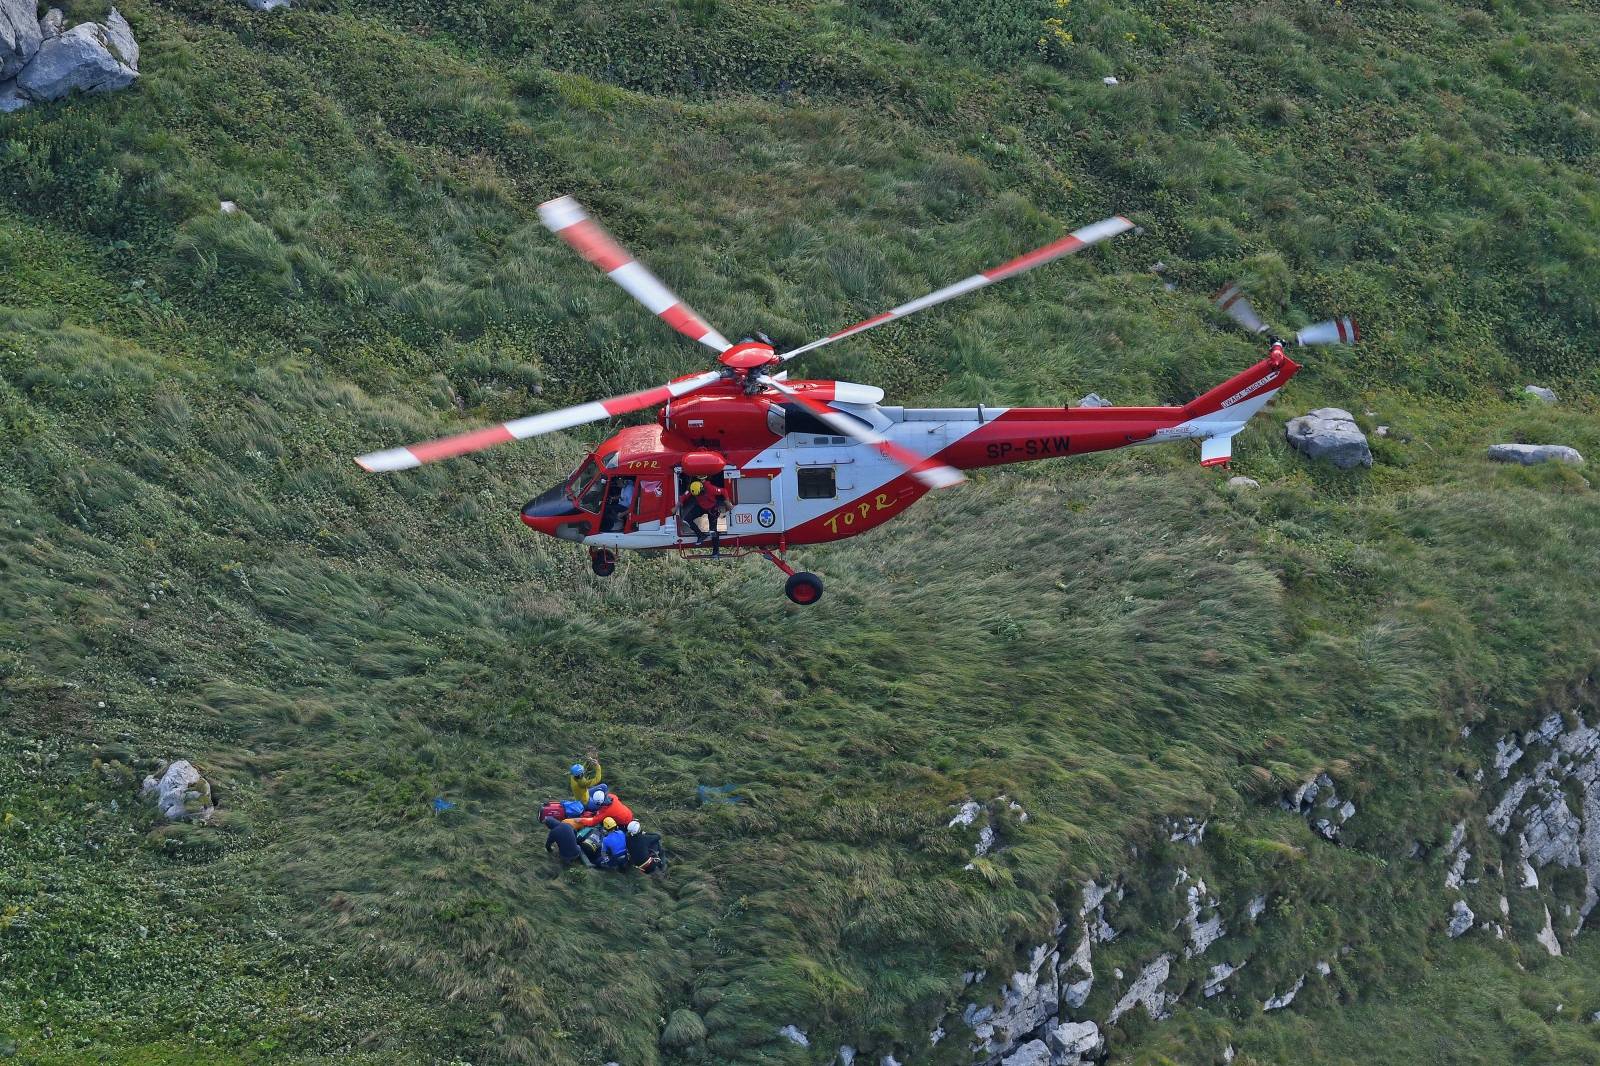 Mountain rescue team (TOPR) helicopter is pictured in Tatra mountains during a search mission near Zakopane